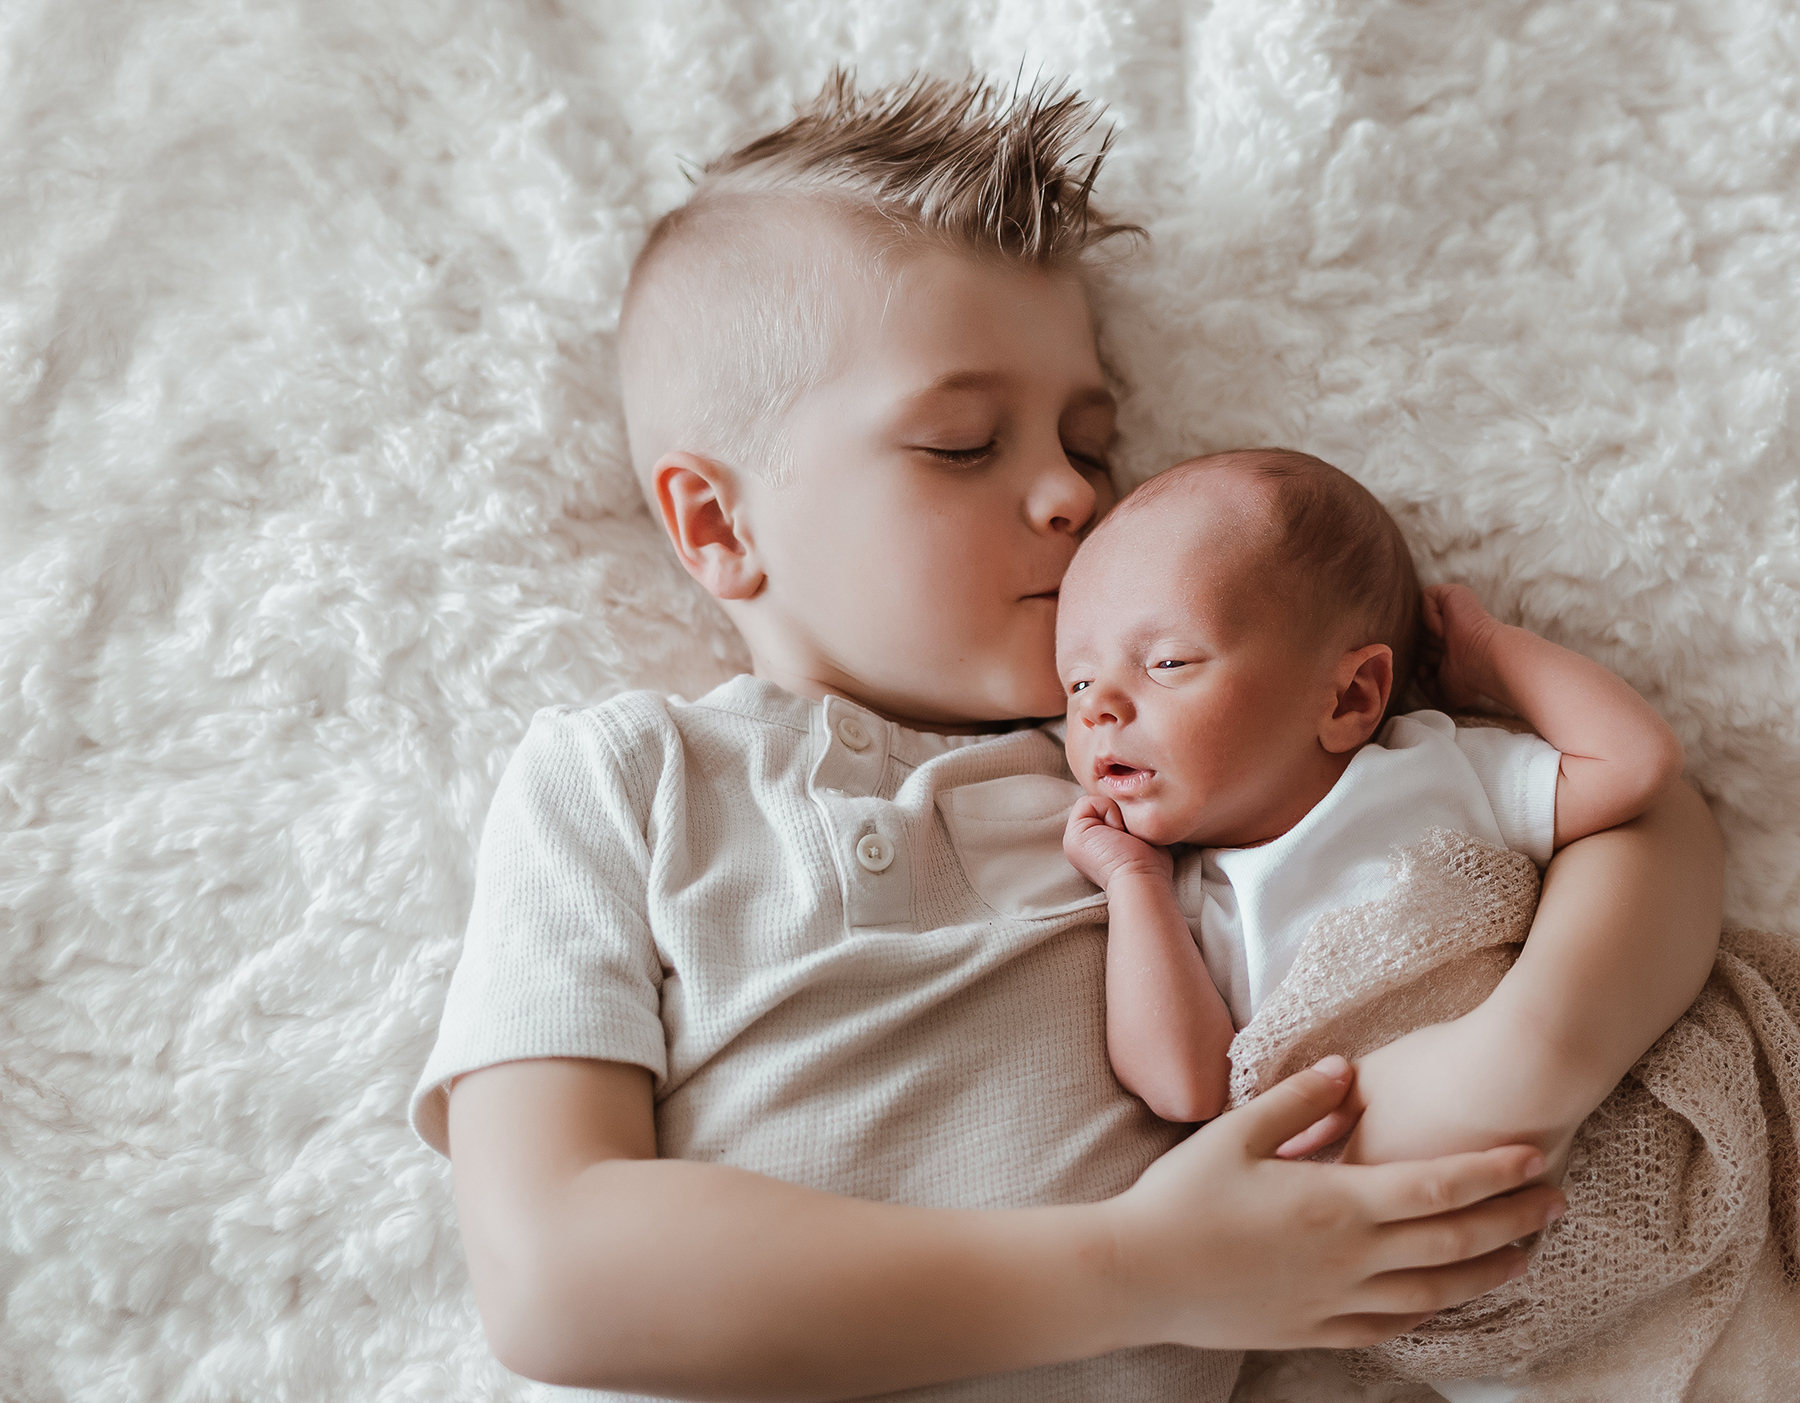 Brother snuggling with newborn baby giving him a kiss